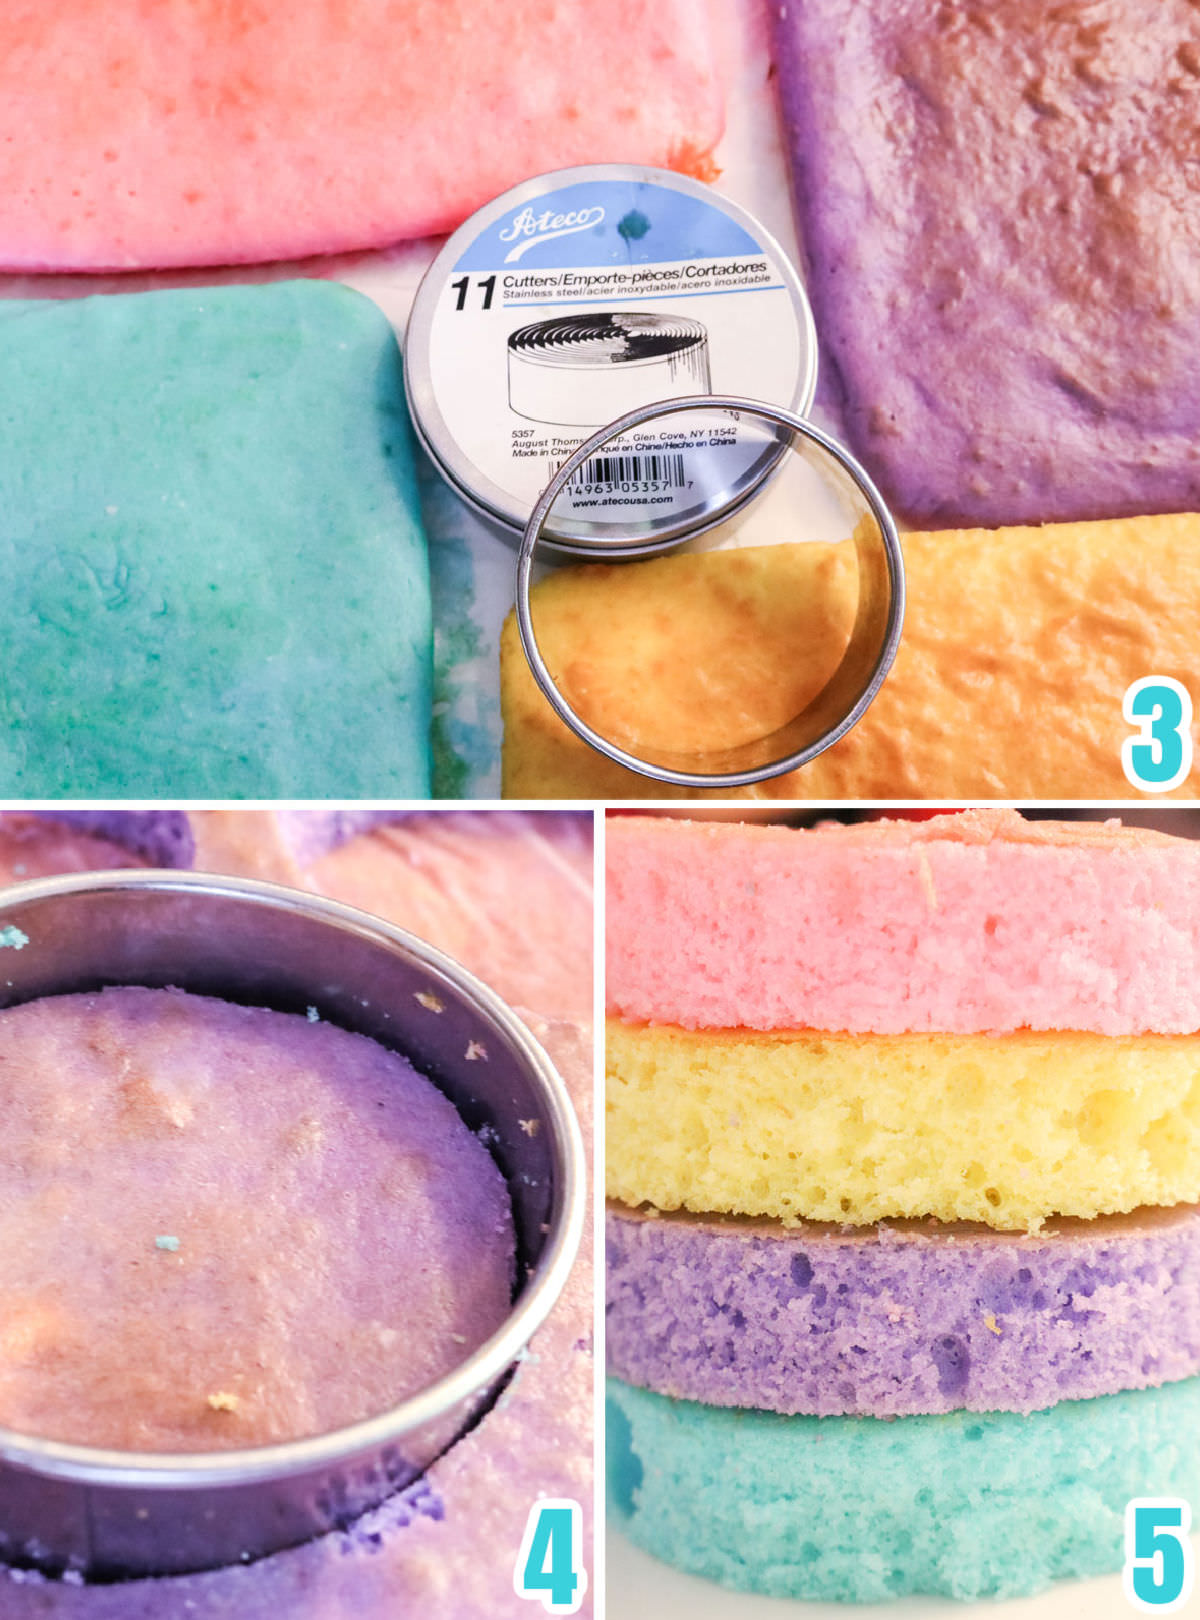 Collage image showing how to cut the colored cakes into circles.